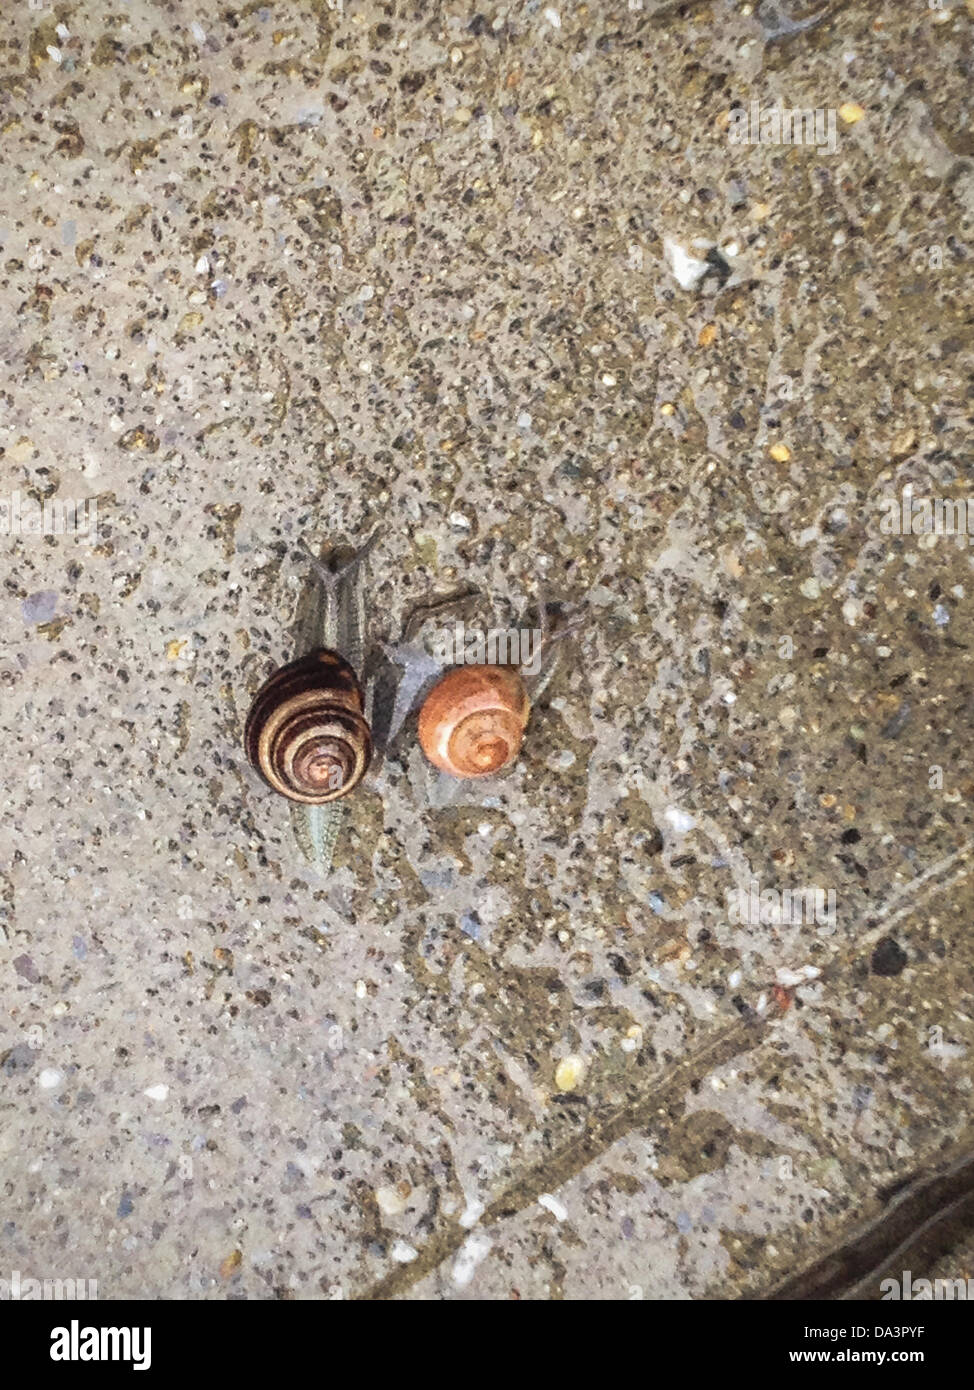 New York, USA. 2nd July 2013 : With continued rainy weather in the forecast, torrential downpours and flash flood warnings in the New York tri-state area, it is the perfect weather for snails.  Here, showing up on a suburban sidewalk in Mt. Kisco, New York. Cepaea nemoralis common names Brown-lipped snail, Larger banded snail, Banded wood snail, Grove snail. iPhone photo. Credit:  Marianne A. Campolongo/Alamy Live News Stock Photo